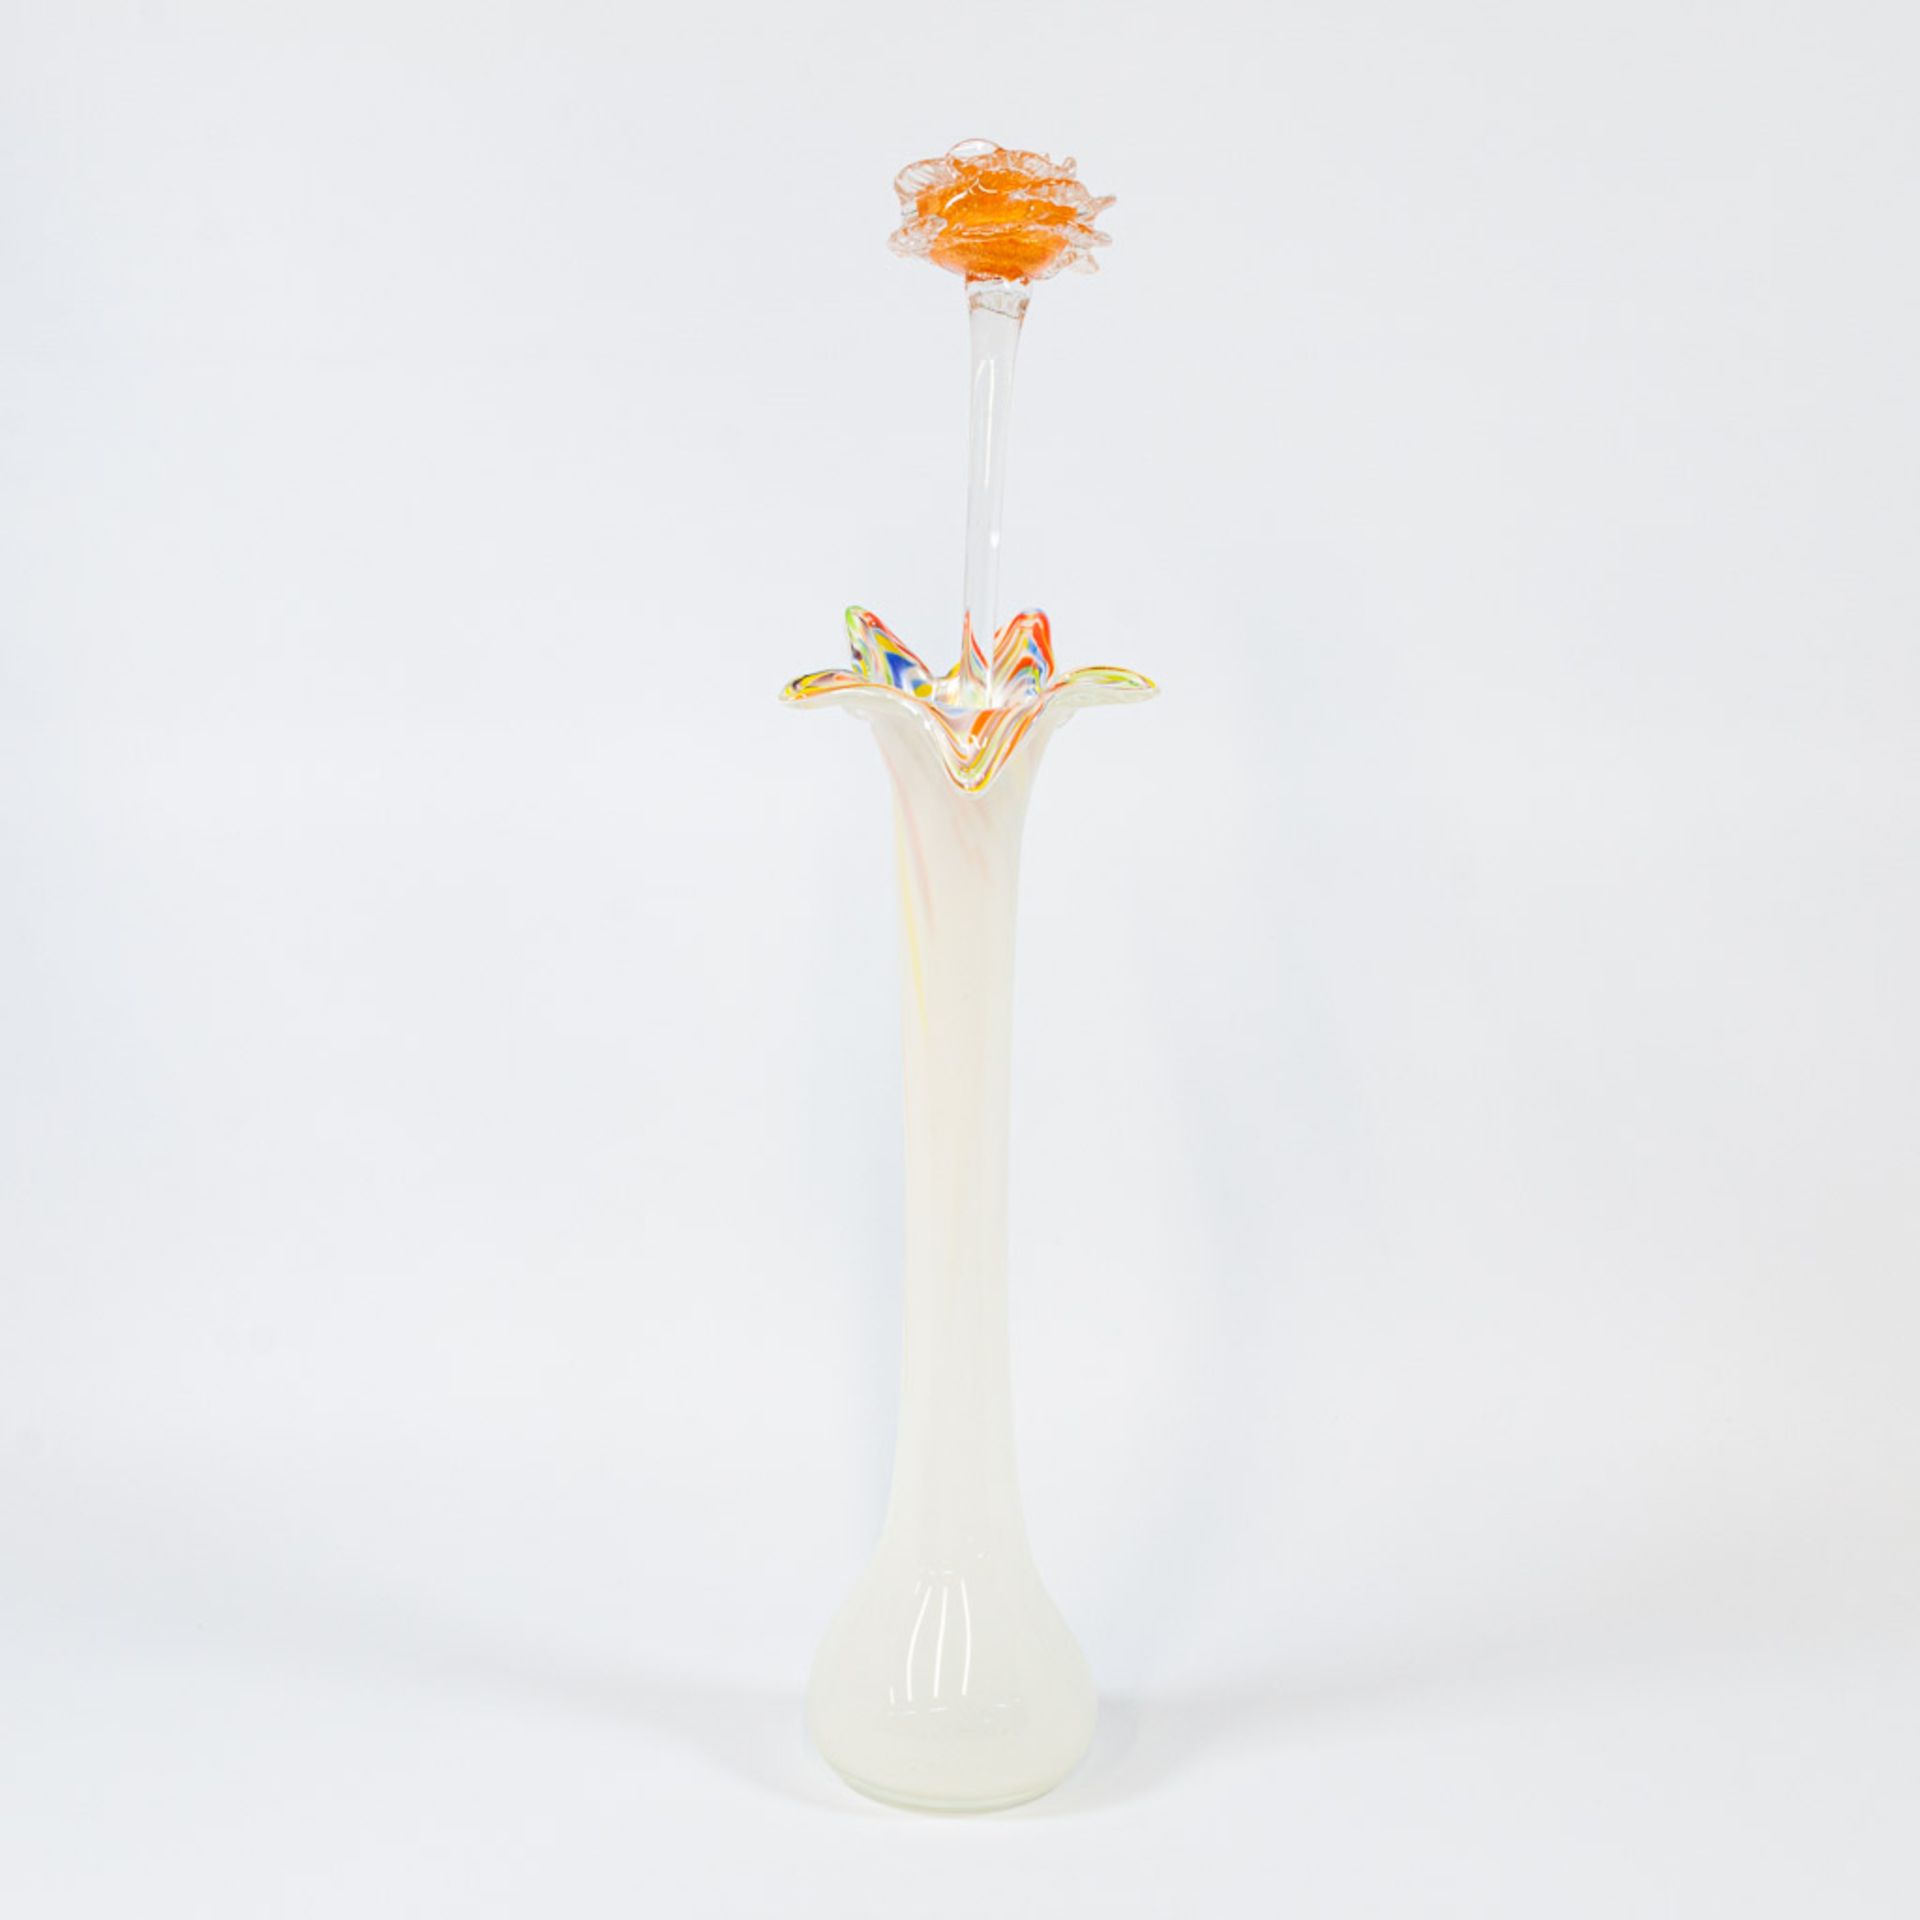 A collection of 4 vases and 4 glass flowers made in Murano, Italy. - Image 11 of 49